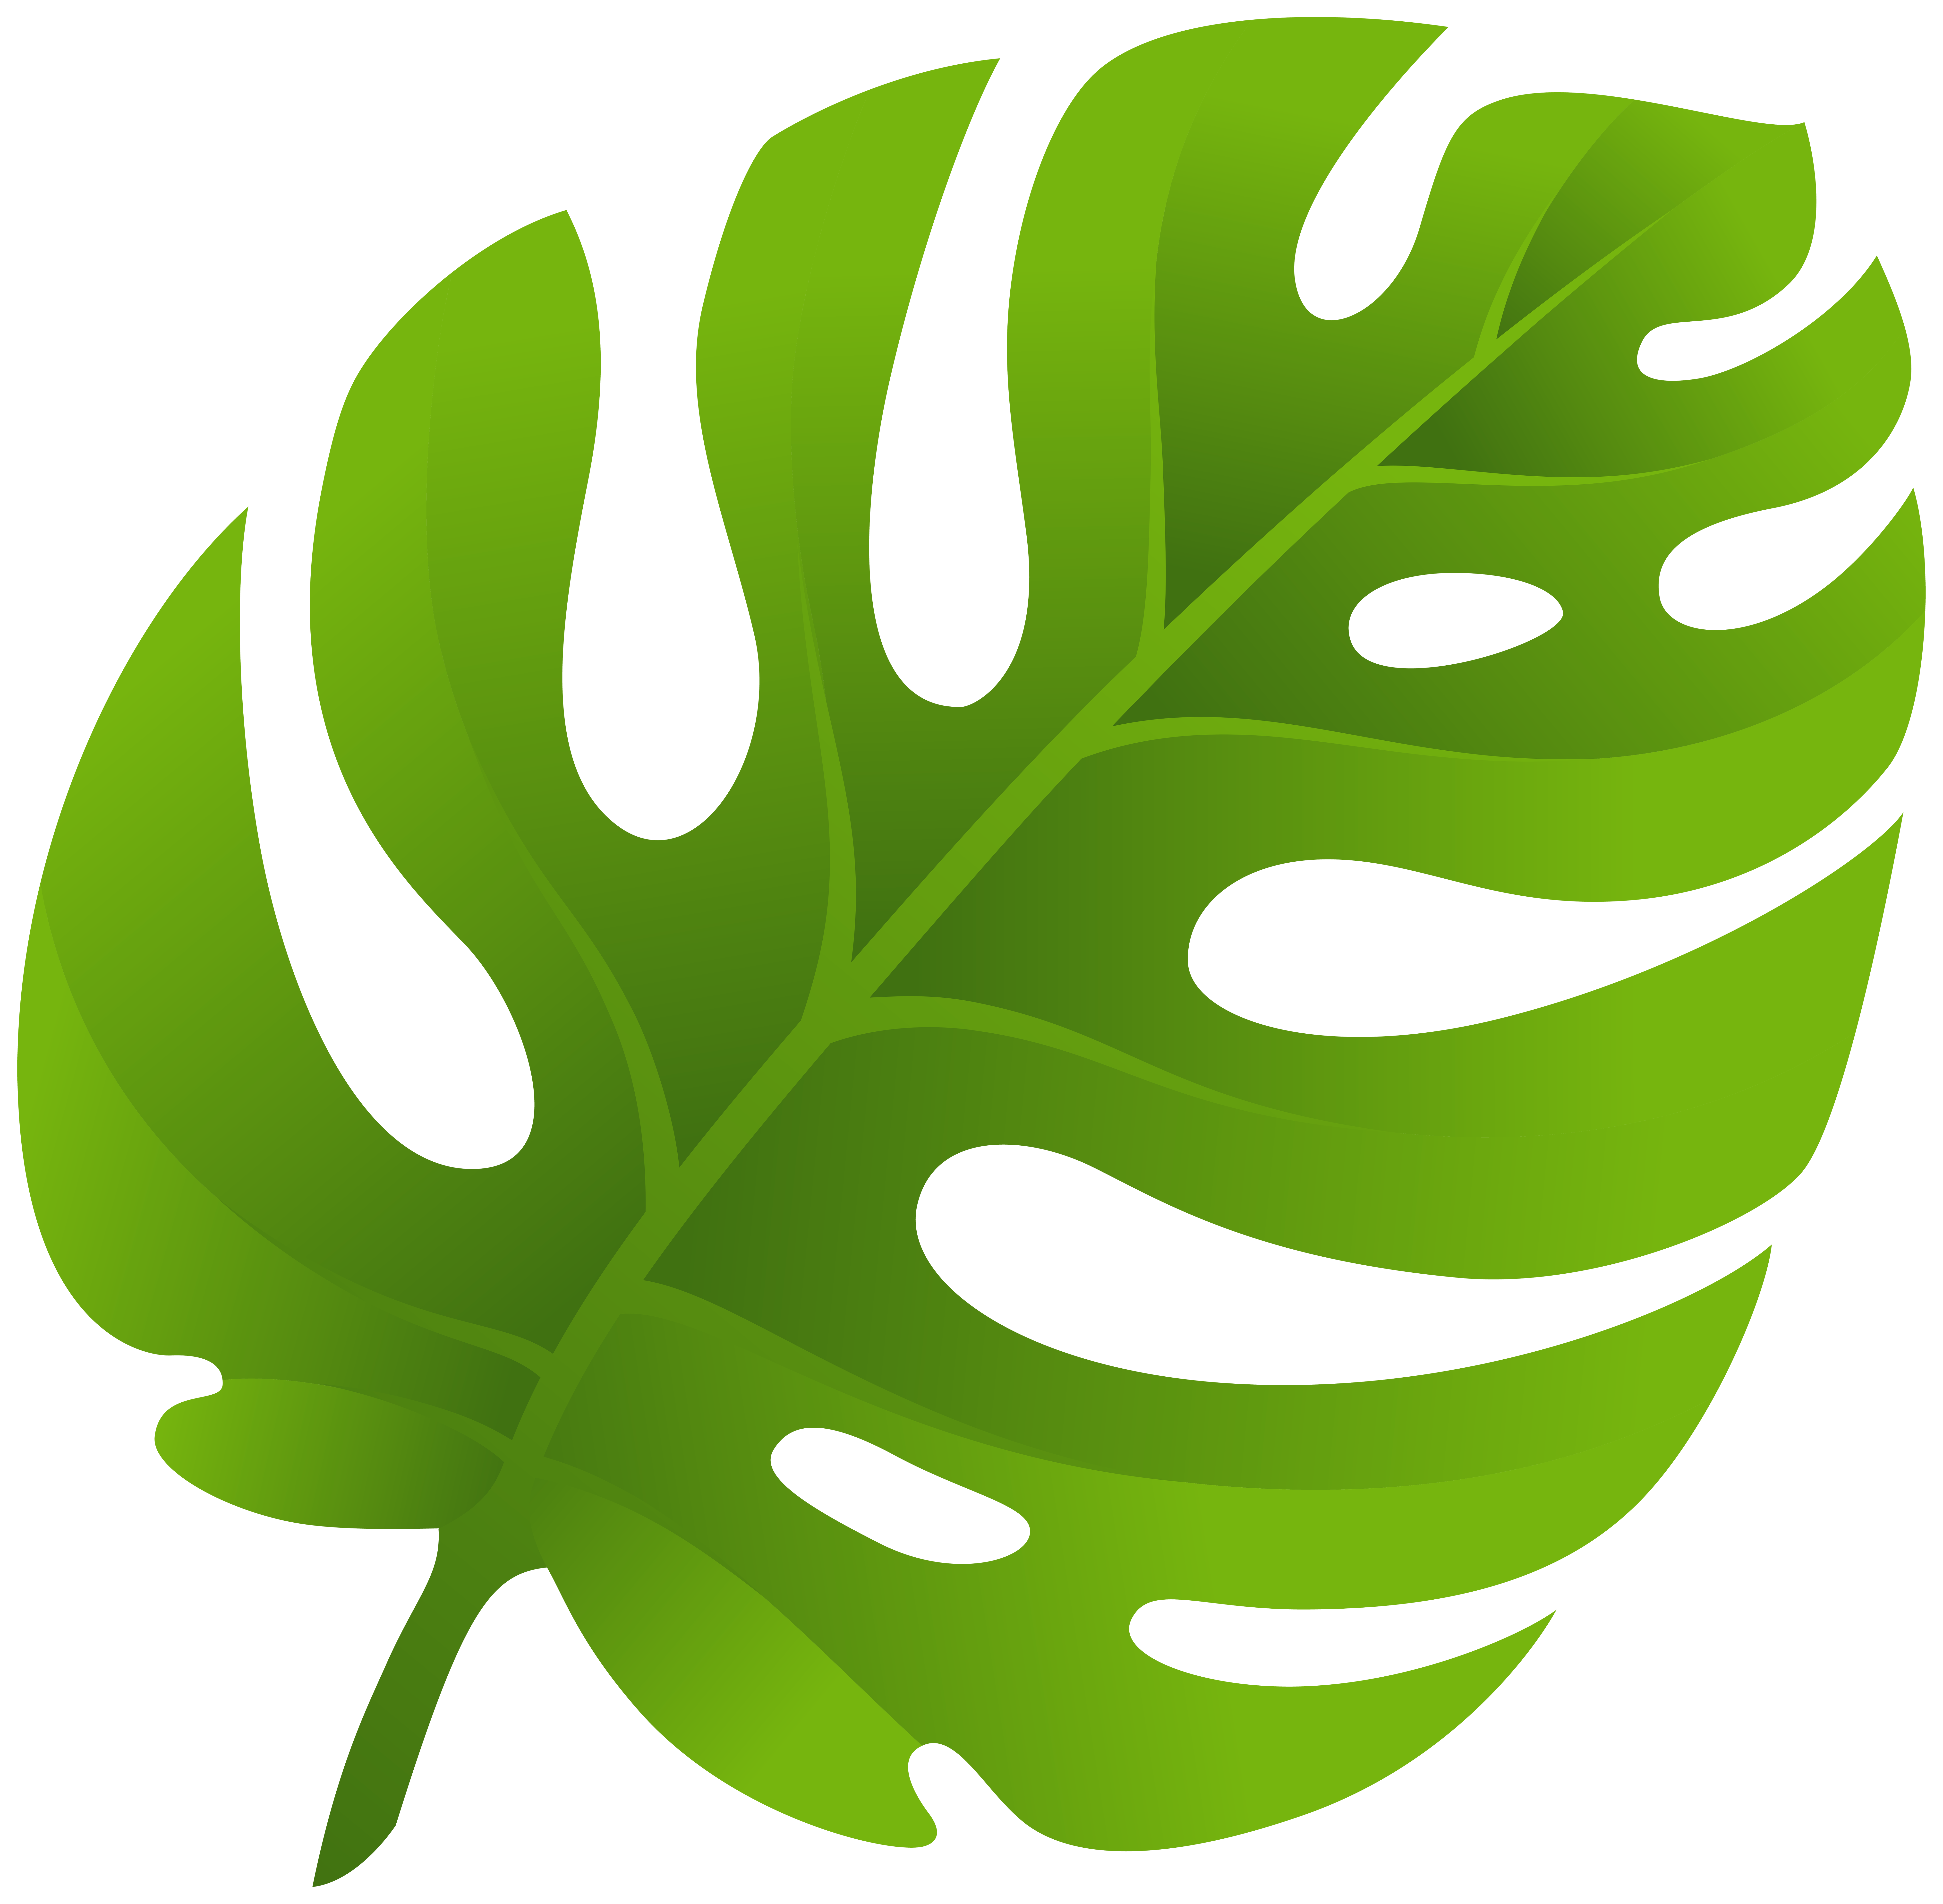 Monstera Leaf Outline Png - It's high quality and easy to use